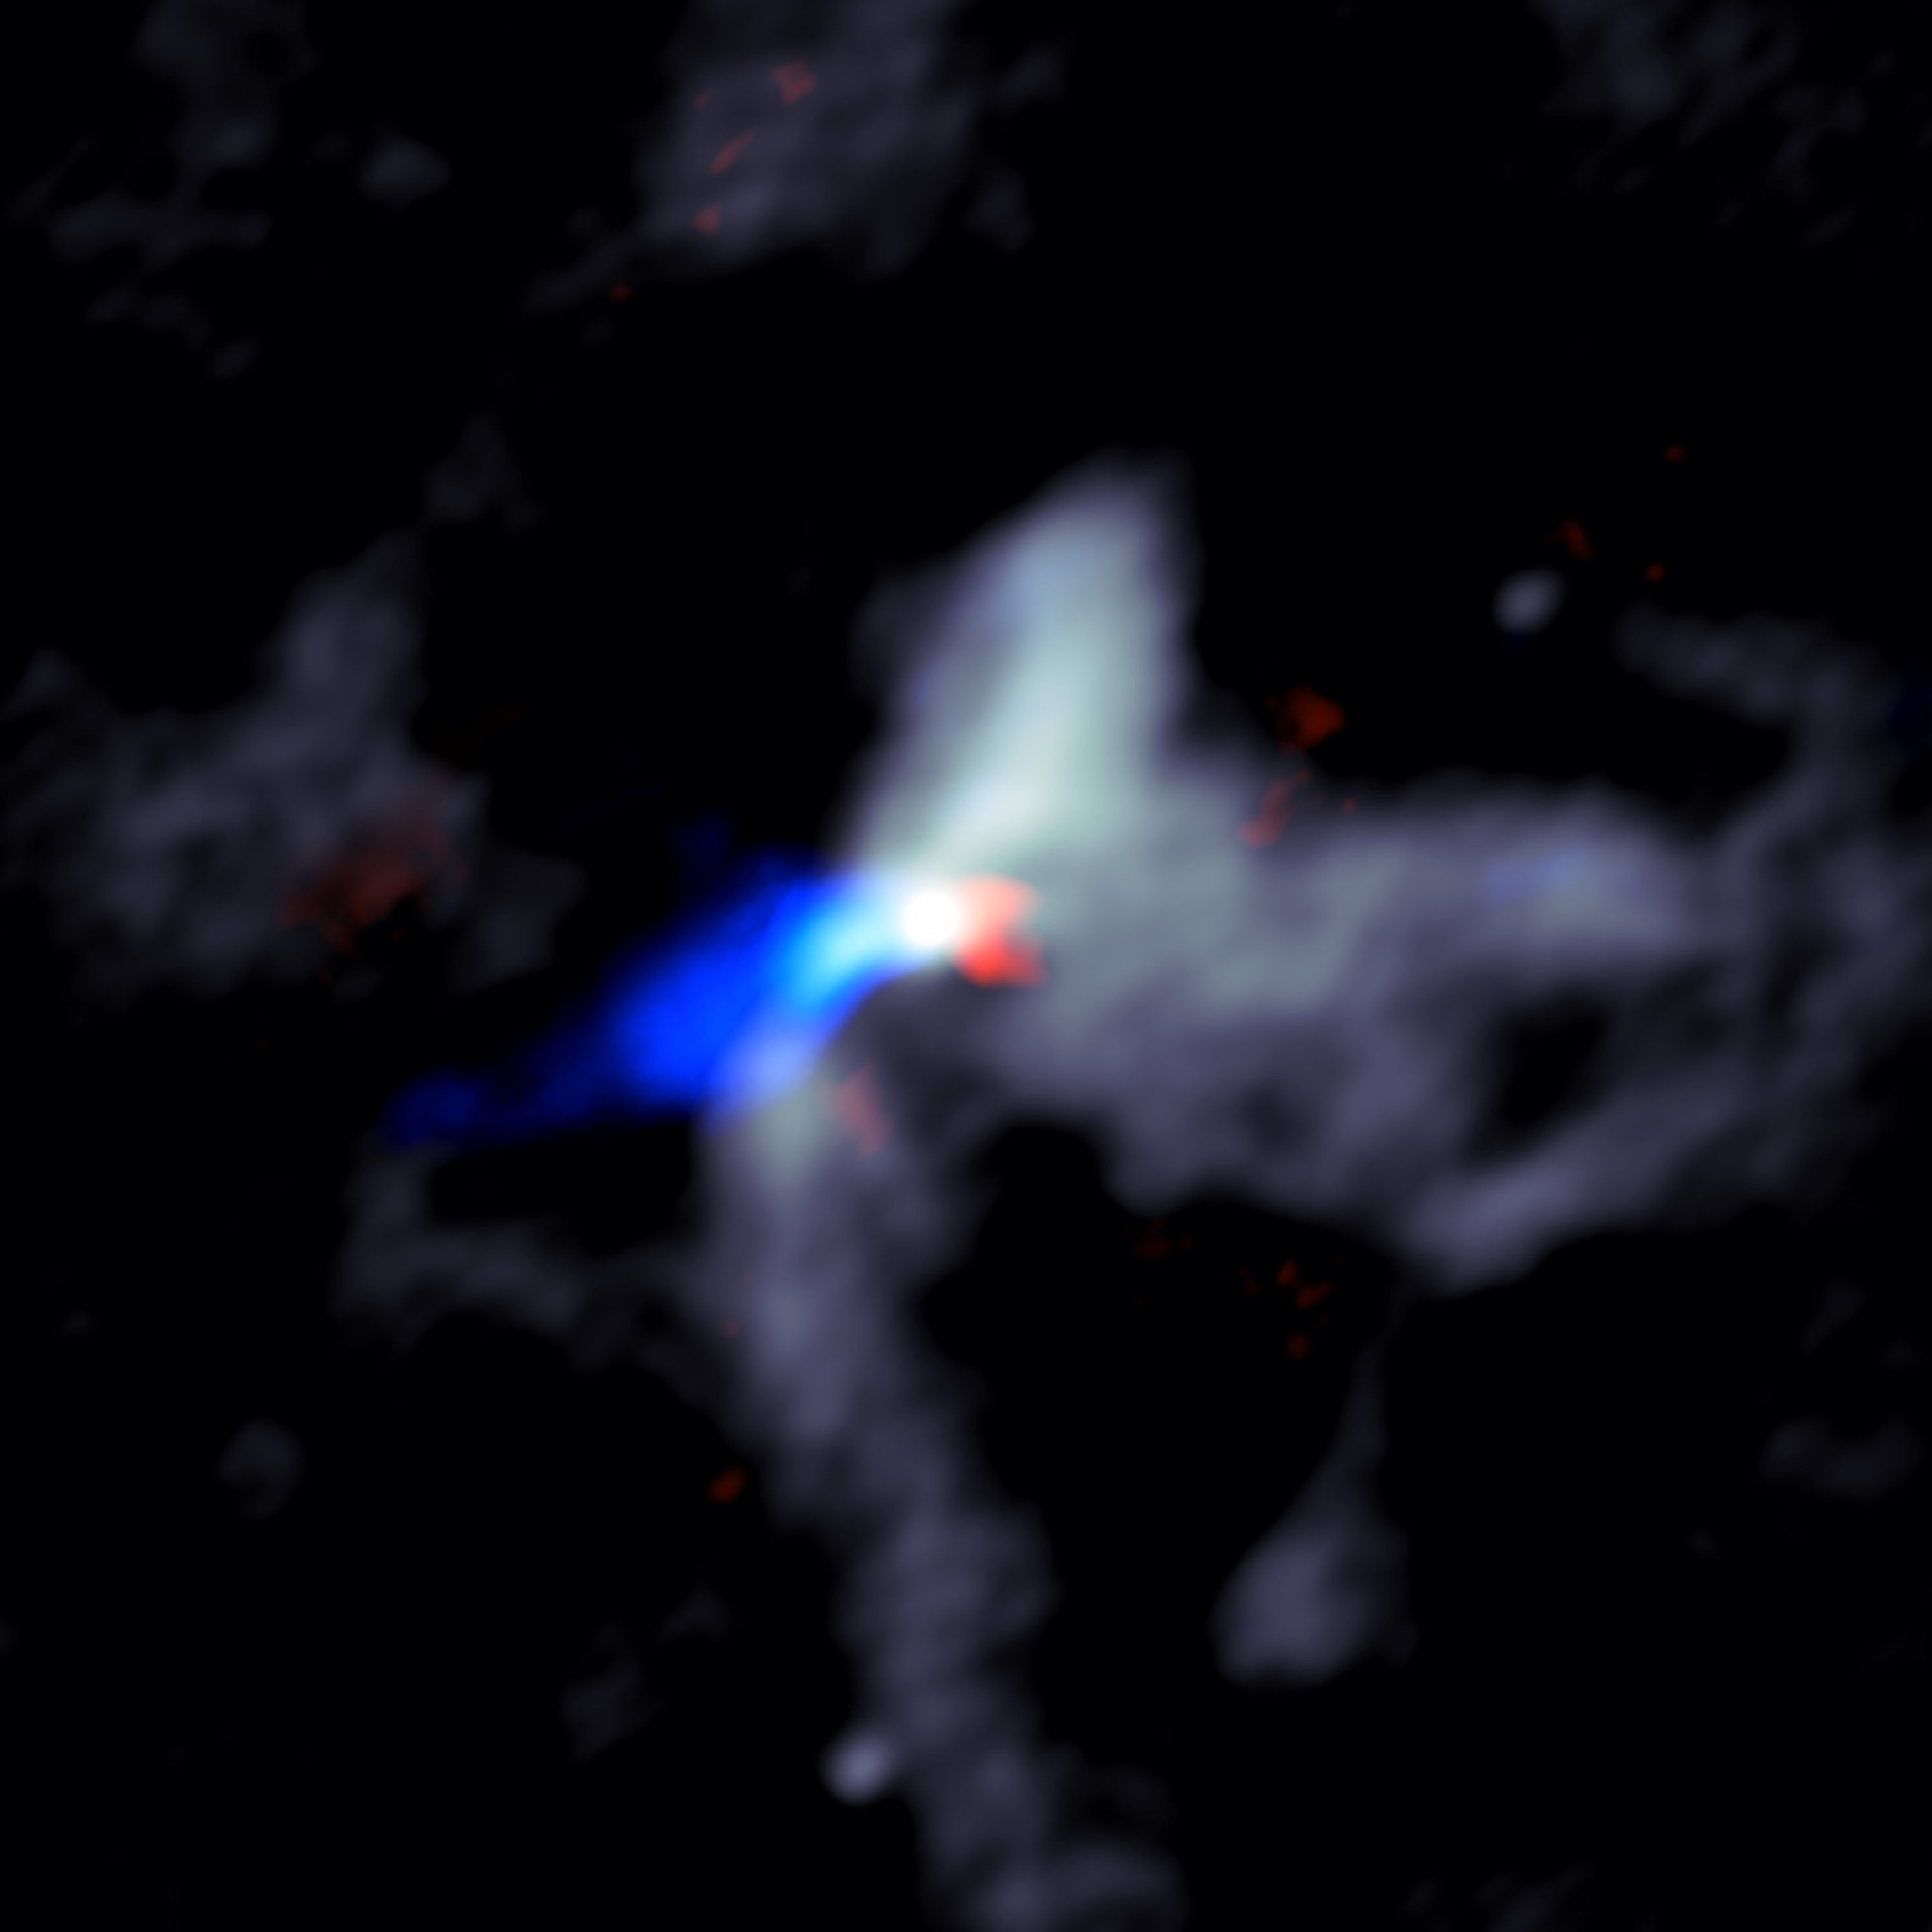 ALMA image of the chaotic scene around a massive young protostar, in this case one called W51e8 . Grey shows dust close to the star, while the red and blue indicate material in the jets moving rapidly outward from the star. Red shows material moving away from Earth and blue material moving toward Earth. Credit: Goddi, Ginsburg, et al., Sophia Dagnello, NRAO/AUI/NSF.